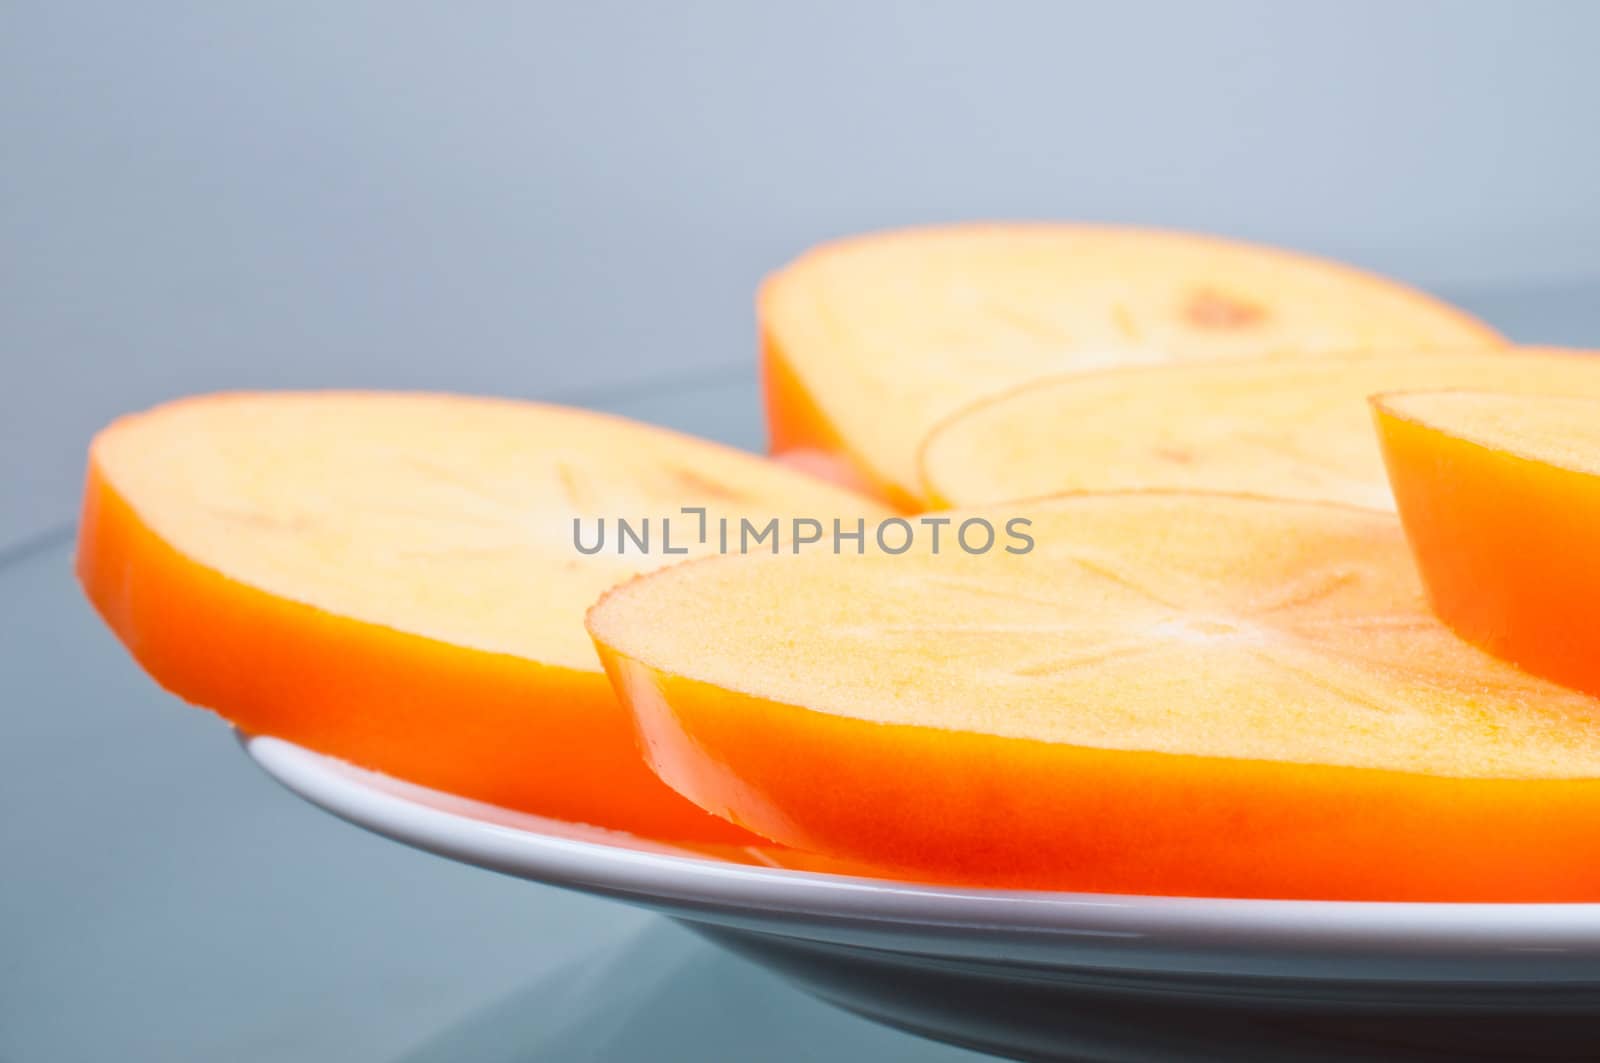 Cuted persimmon few pieces on plate by Nanisimova